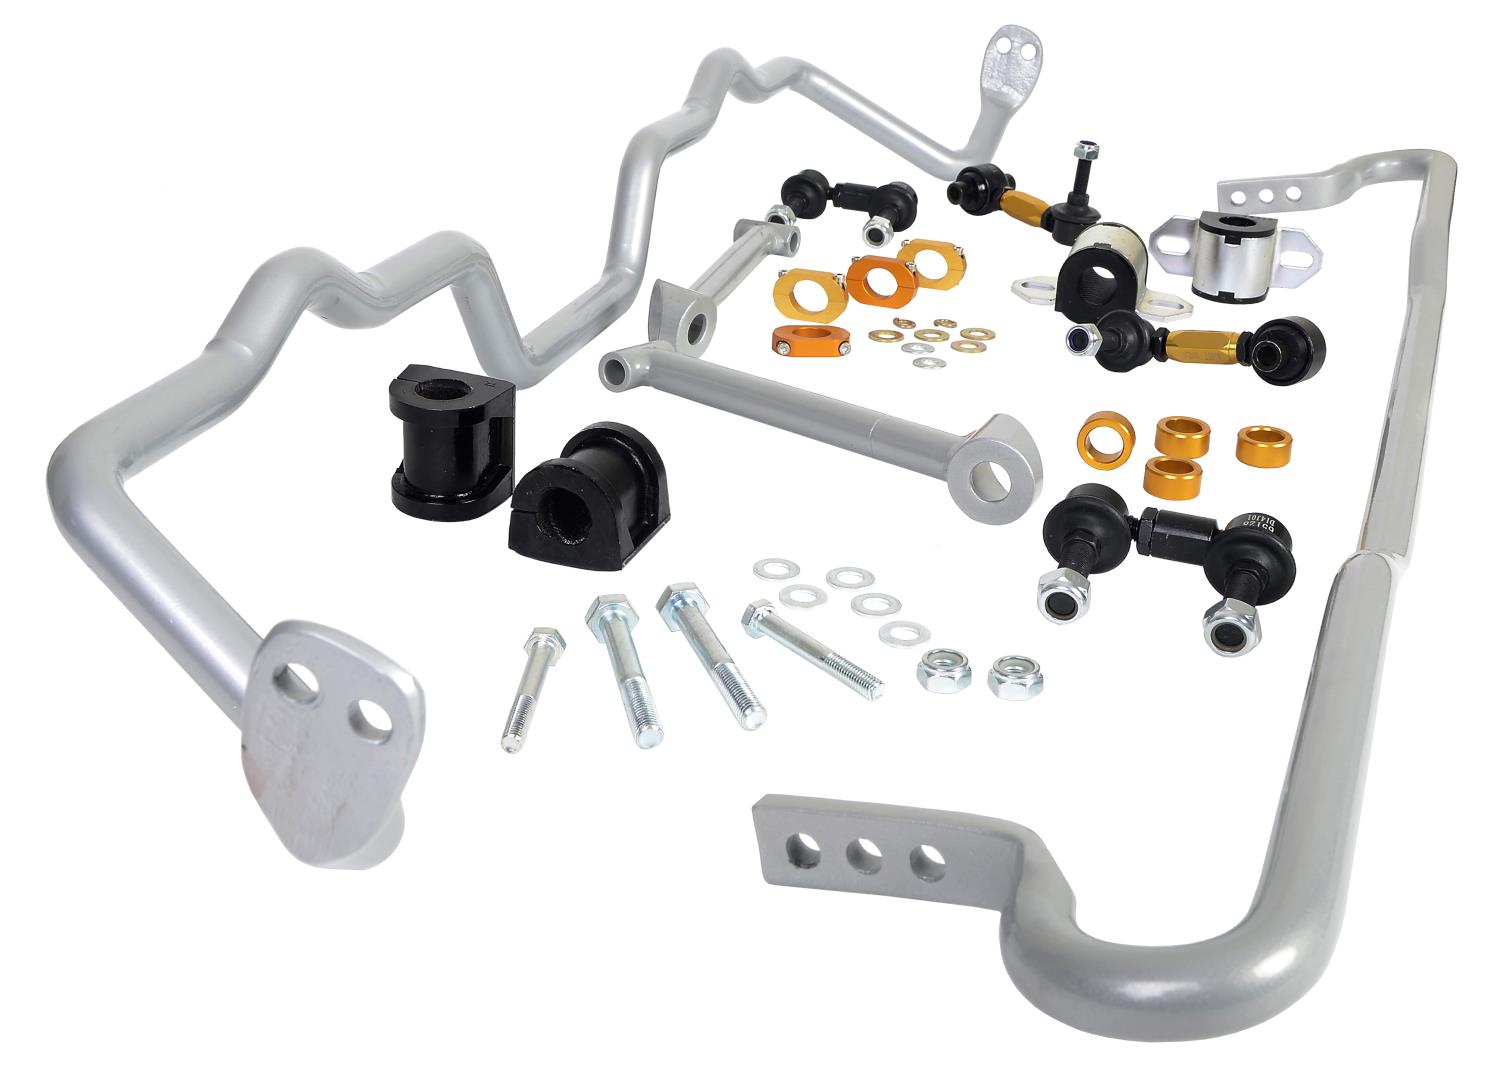 BSK015 Front and Rear Sway Bar Kit for 2010-2012 Subaru Legacy 2.5 GT